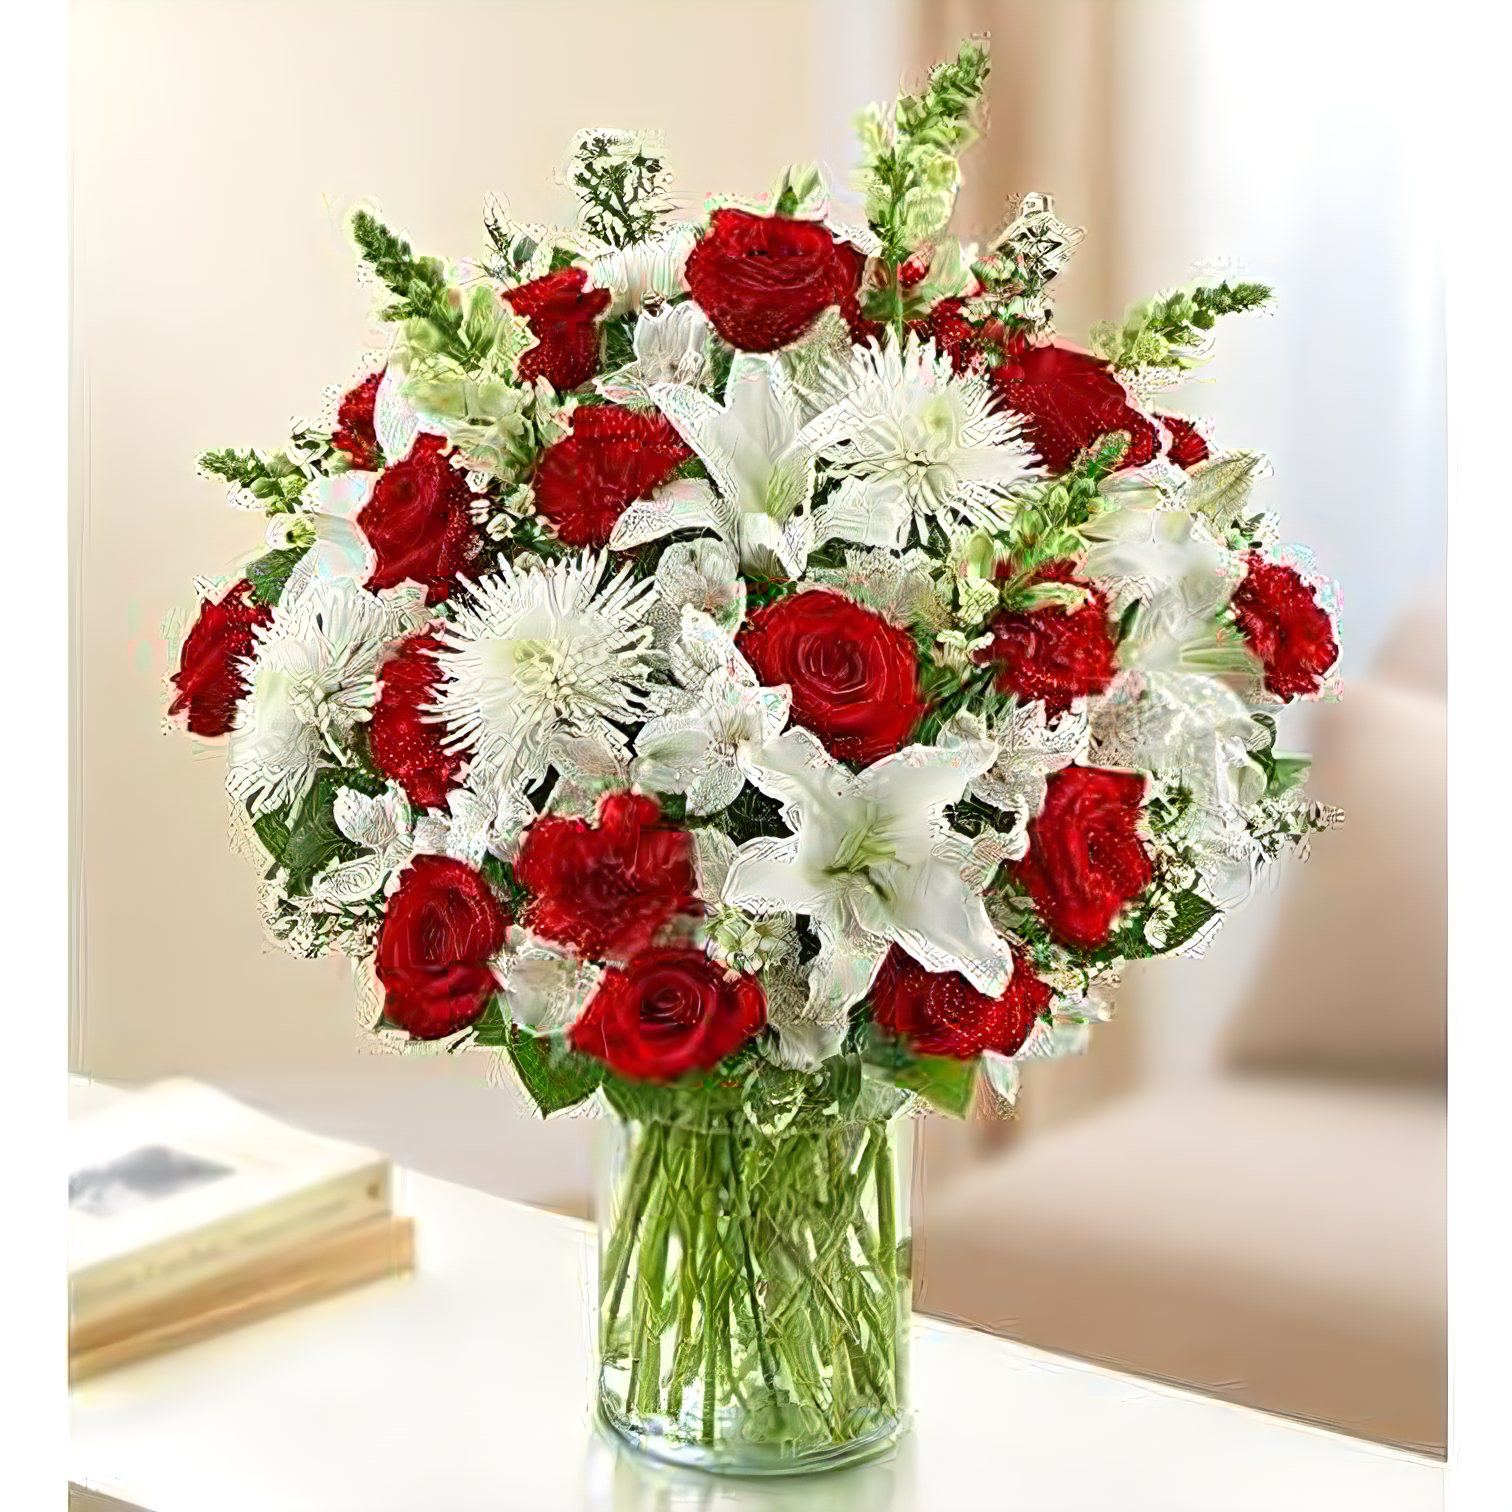 Sincerest Sorrow - Red and White - Funeral > Vase Arrangements